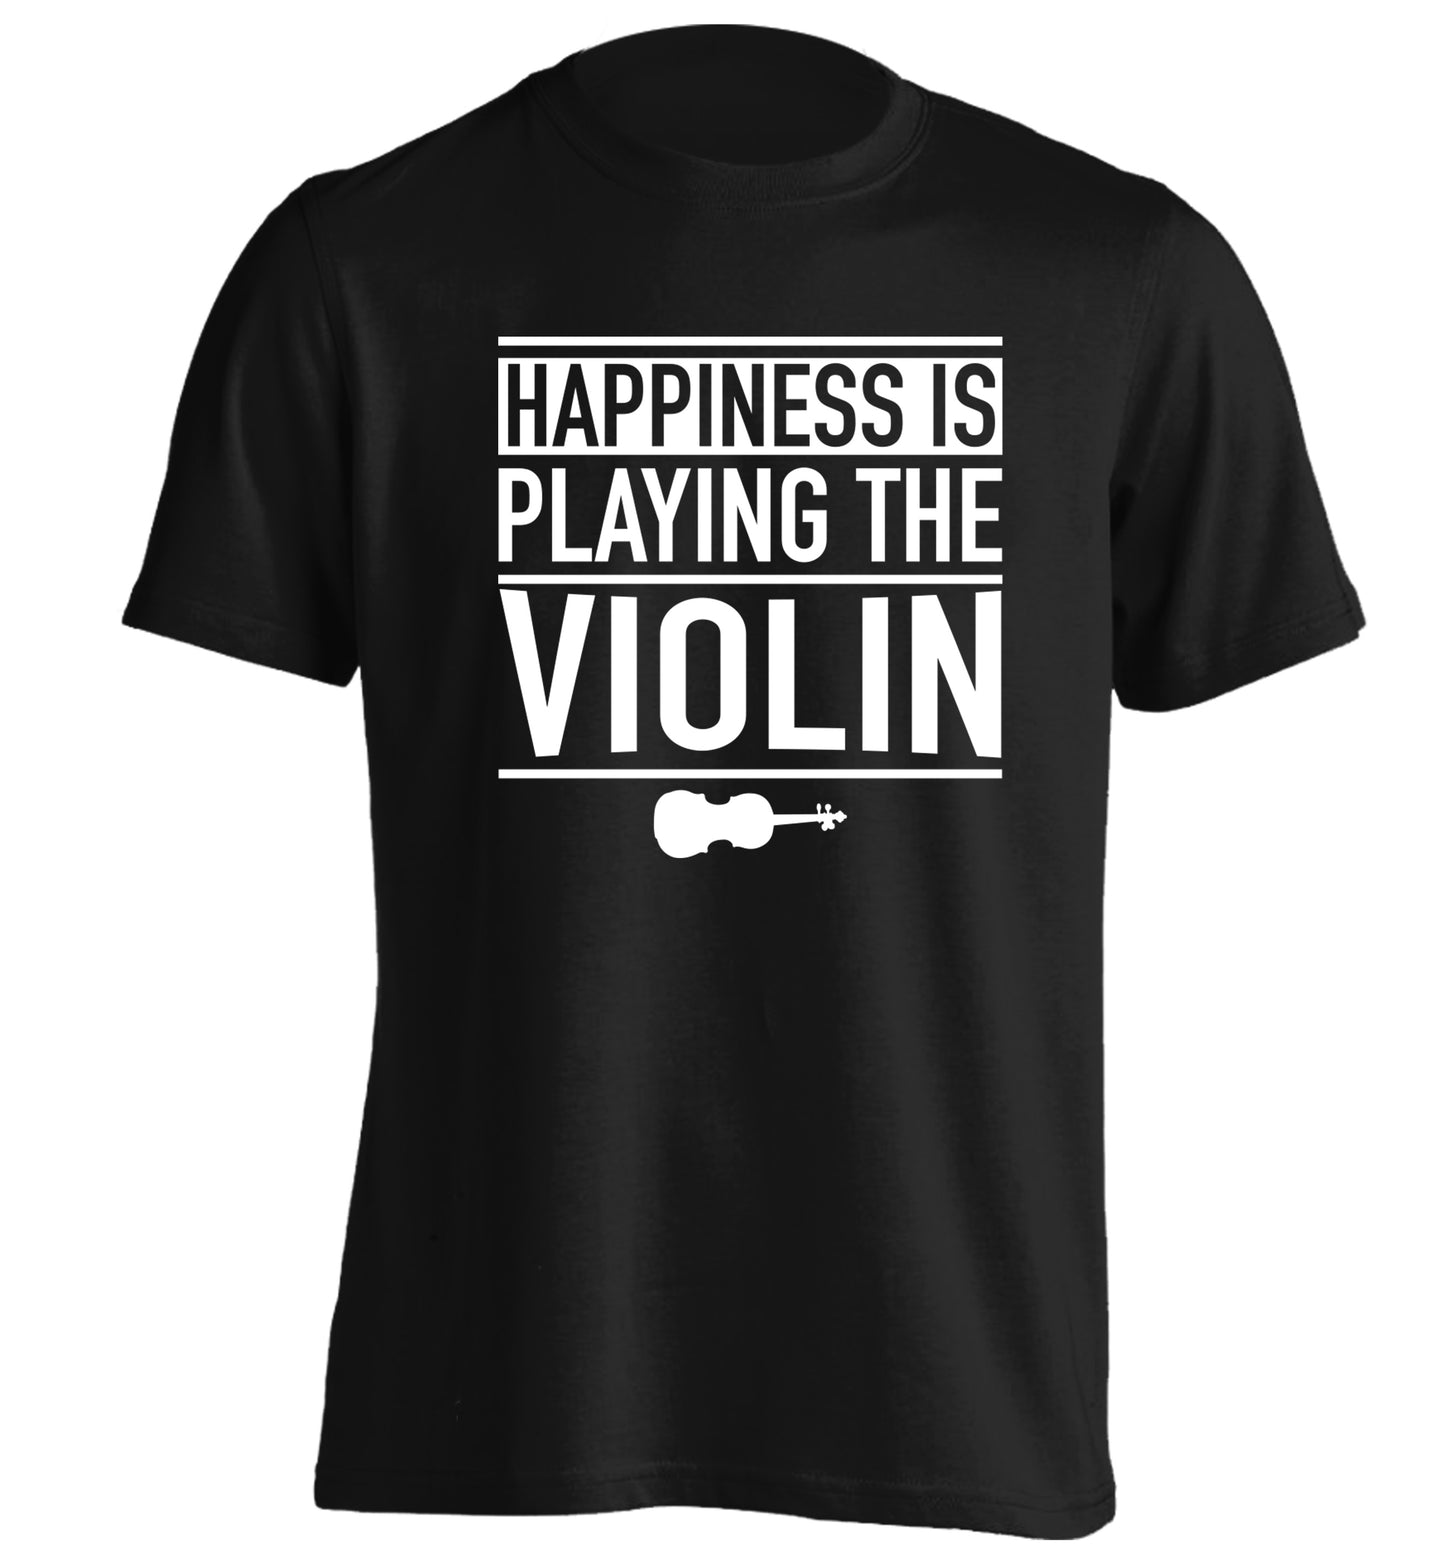 Happiness is playing the violin adults unisex black Tshirt 2XL